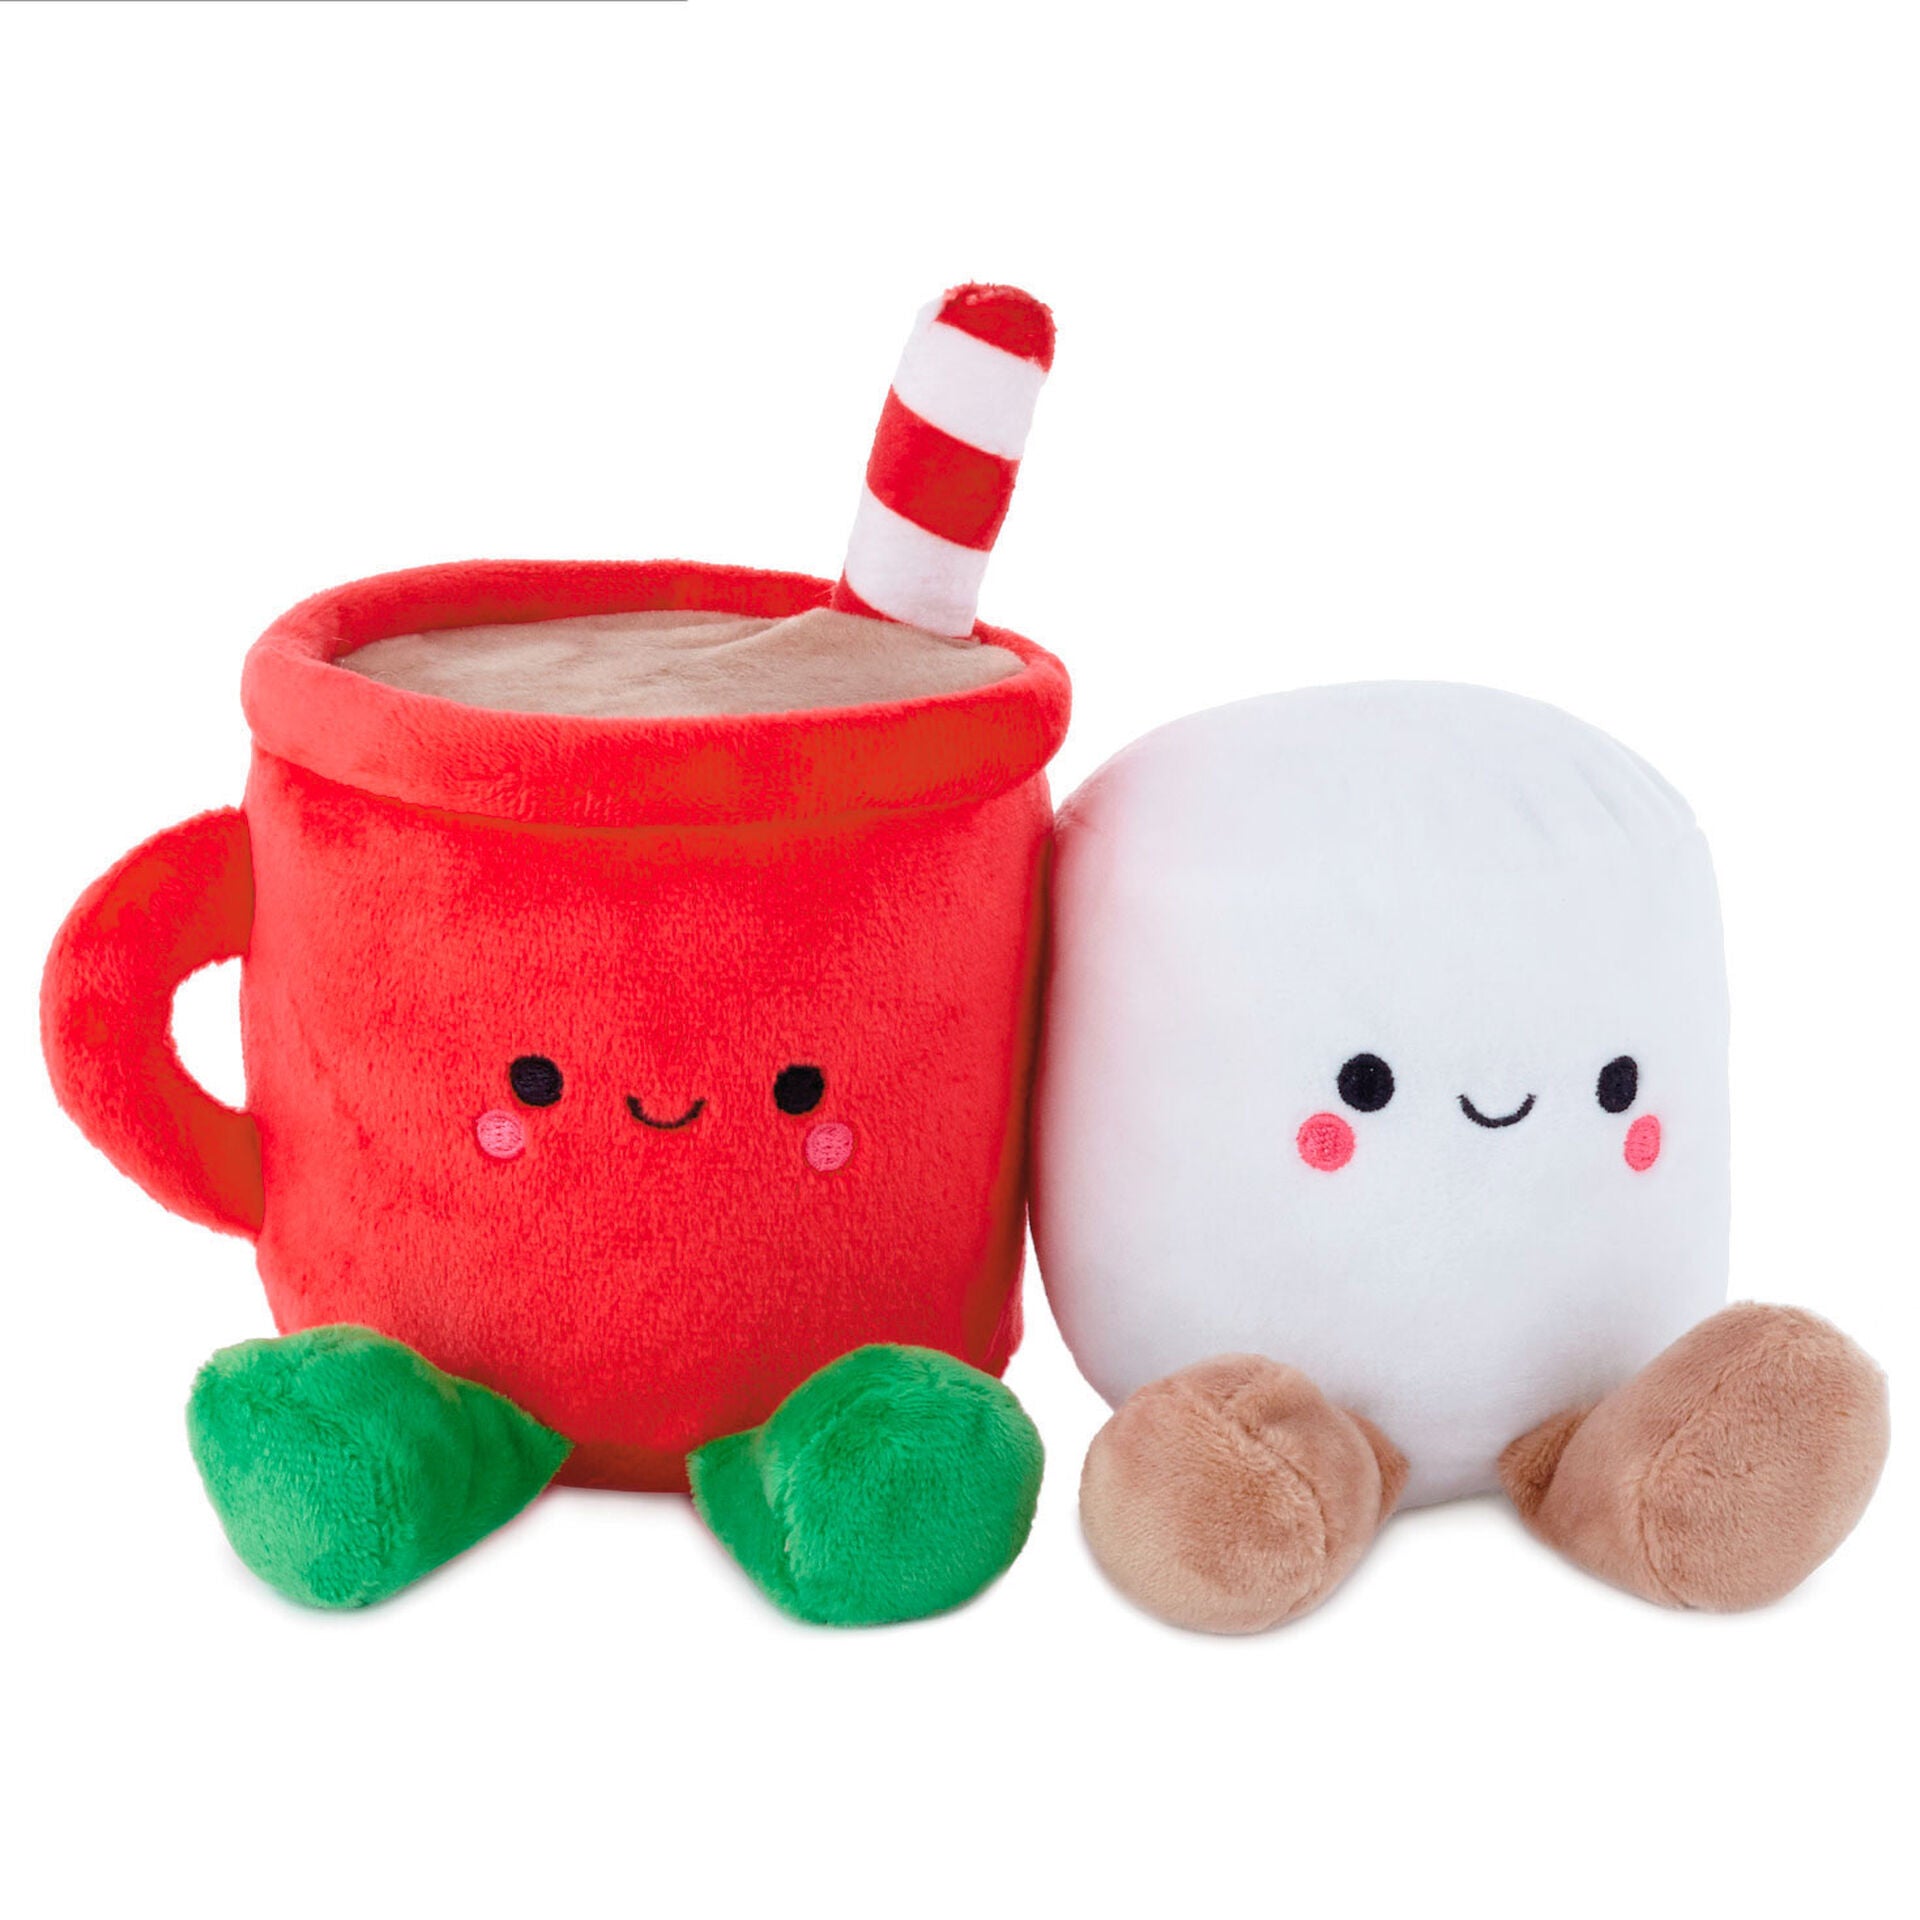 Better Together Hot Cocoa Mug and Marshmallow Magnetic Plush